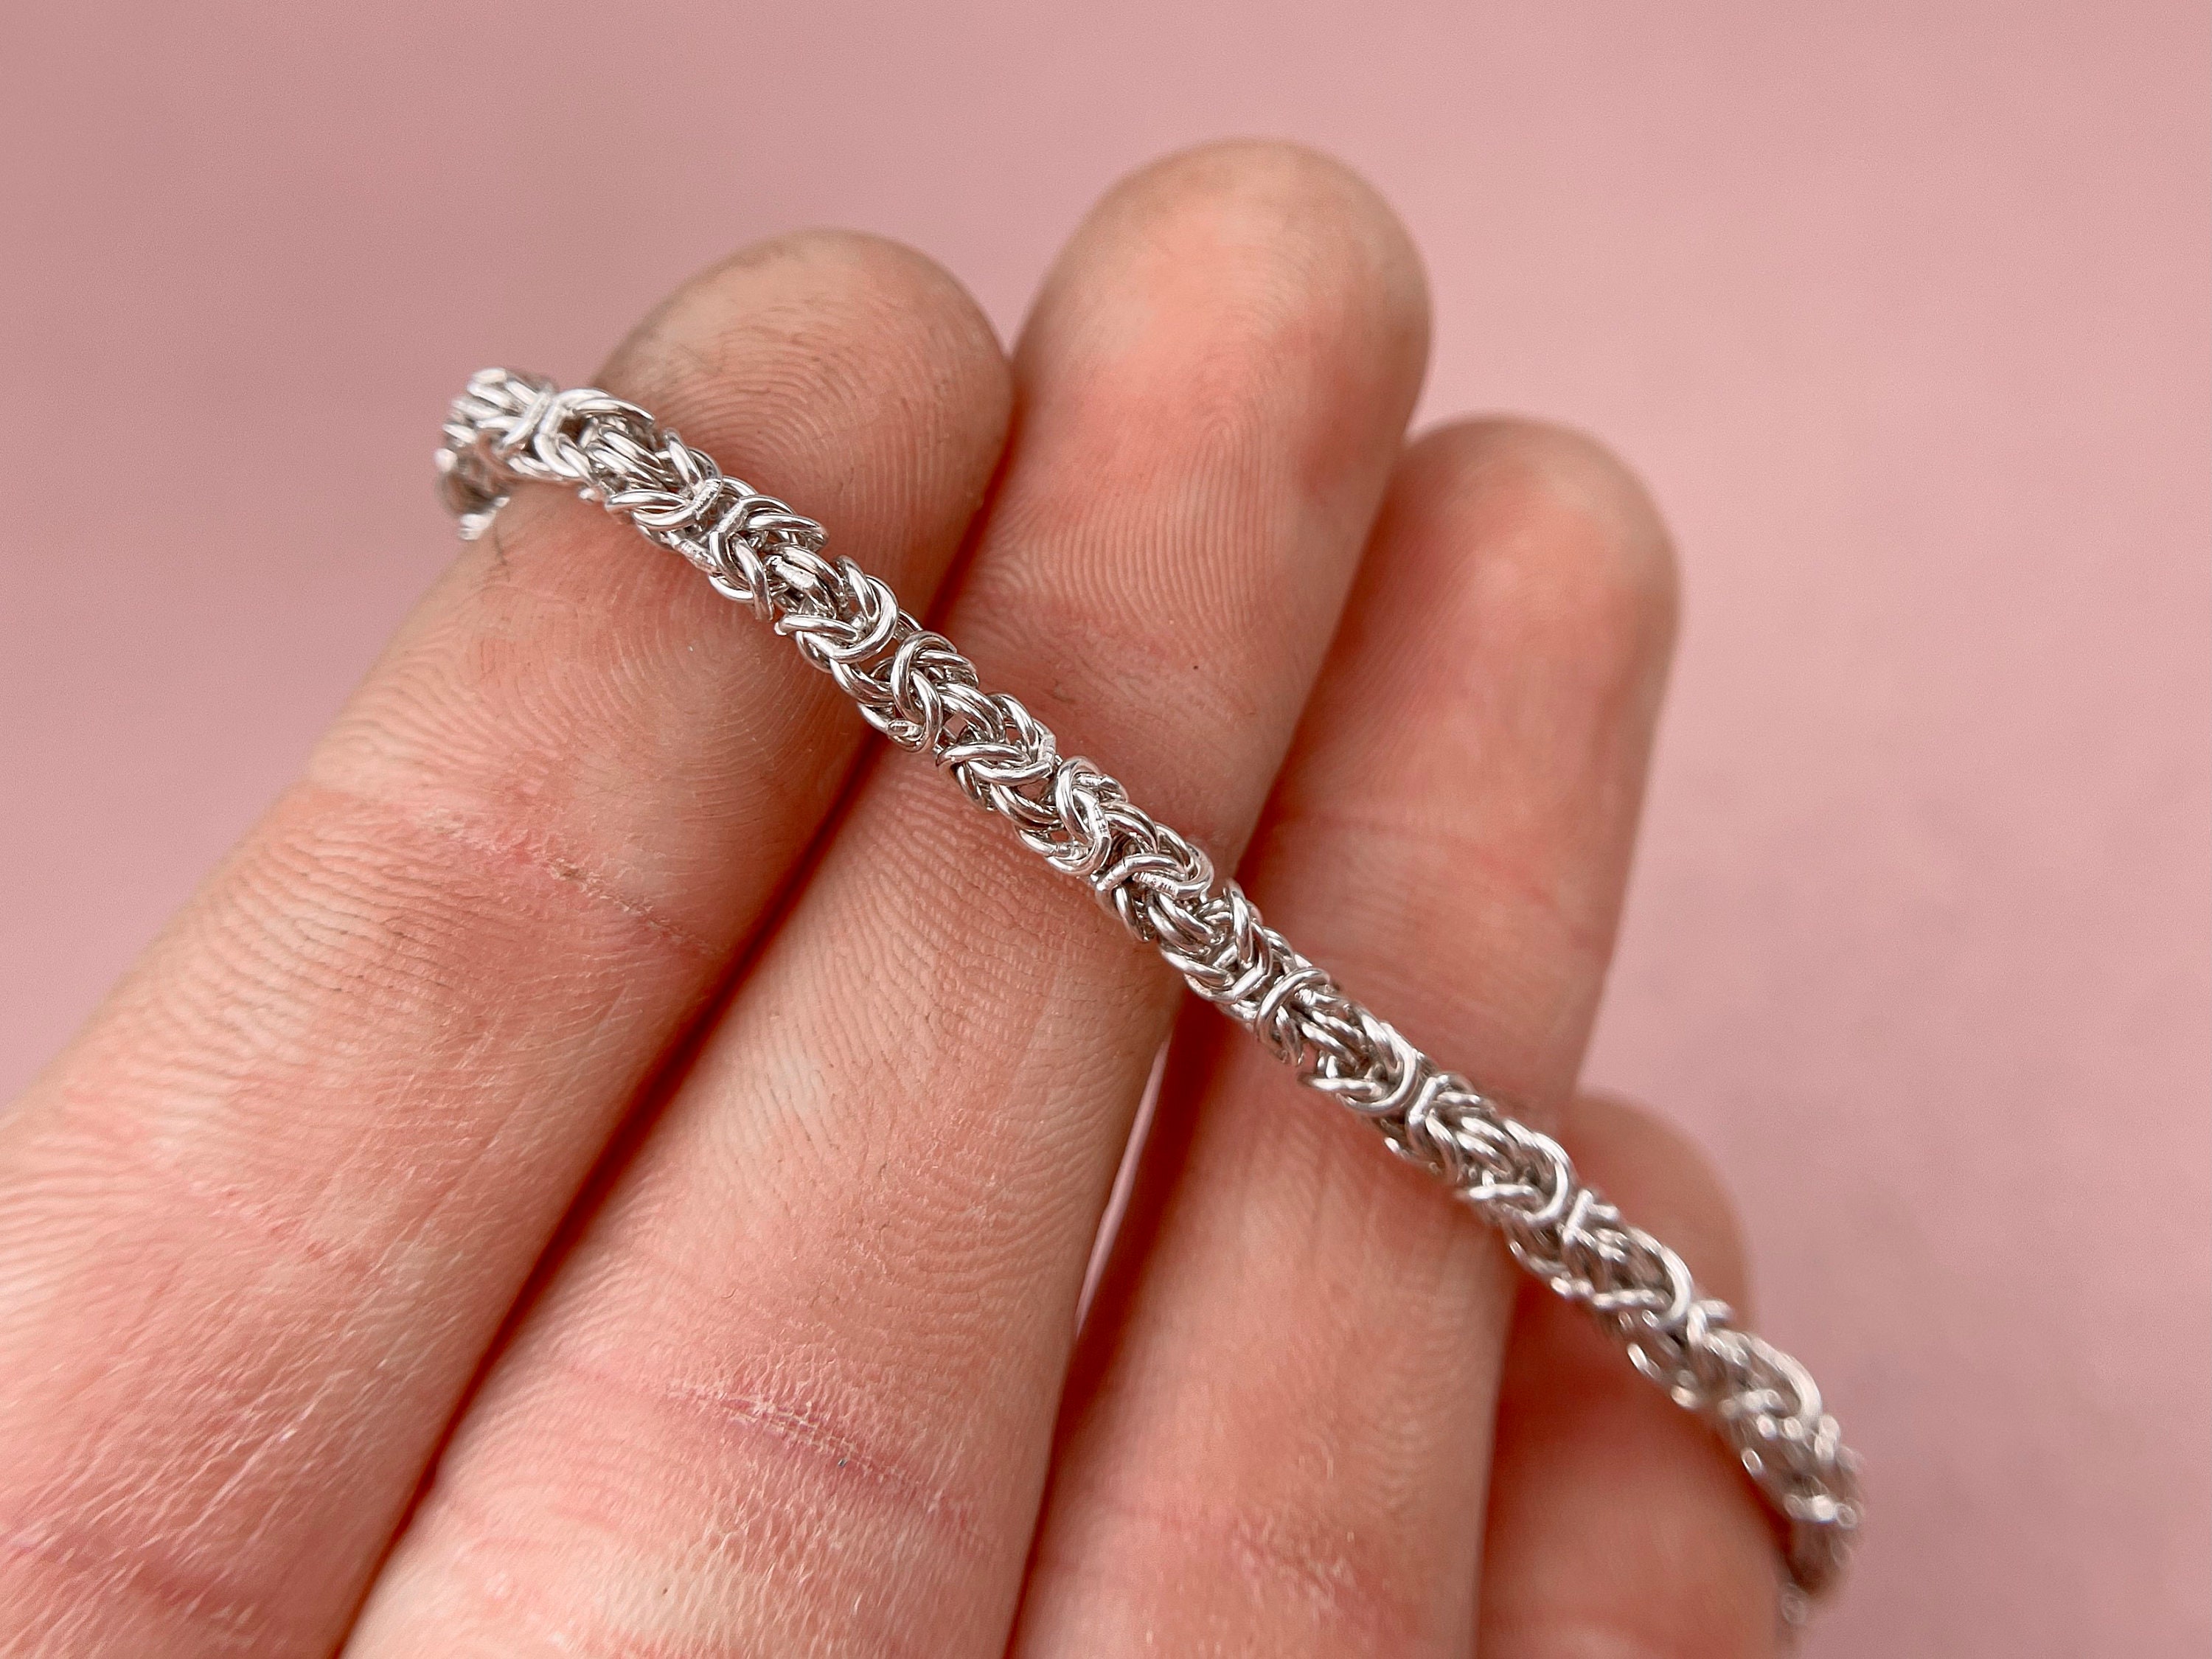 Sterling Silver Byzantine Chainmail Bracelet with Hand-Stamped Spinners Small - 7.5 Inches